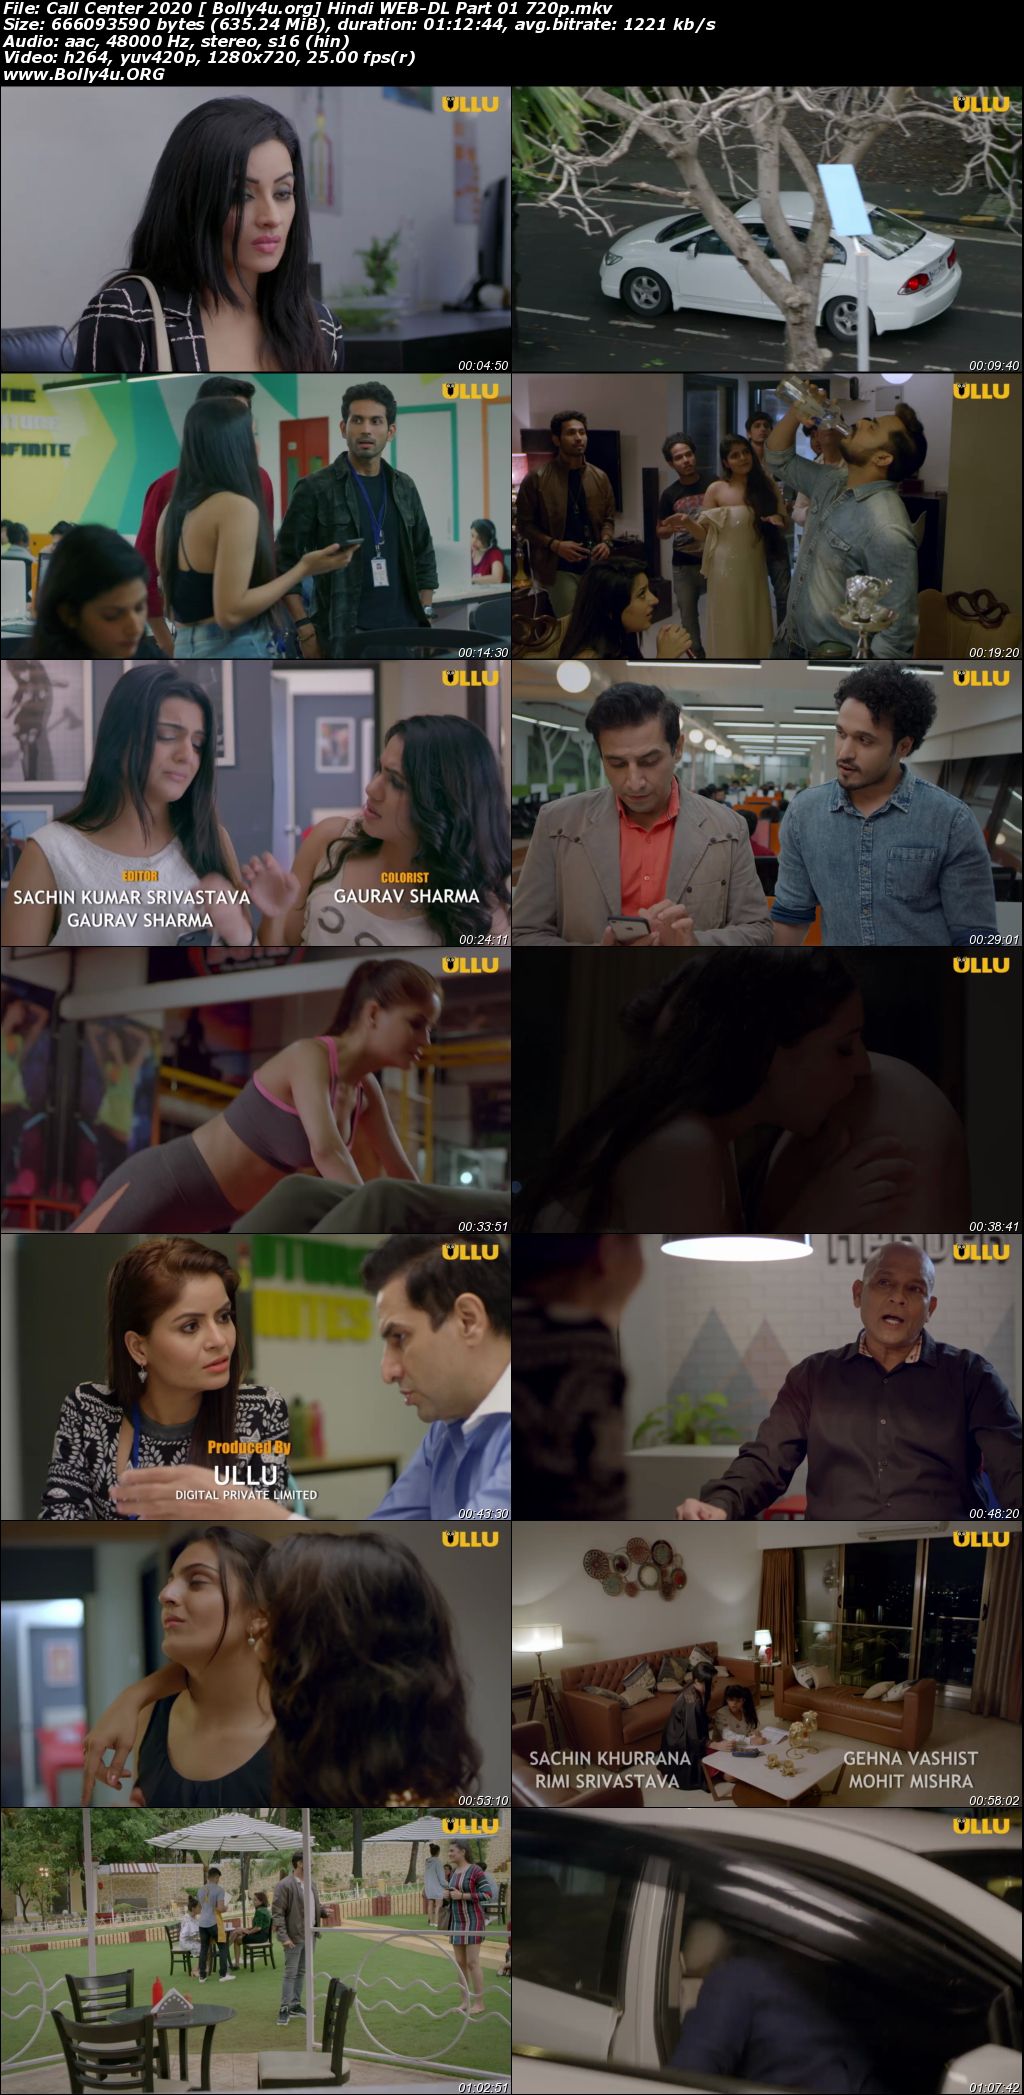 Call Center 2020 WEB-DL 900Mb Hindi Complete S01 Download 720p